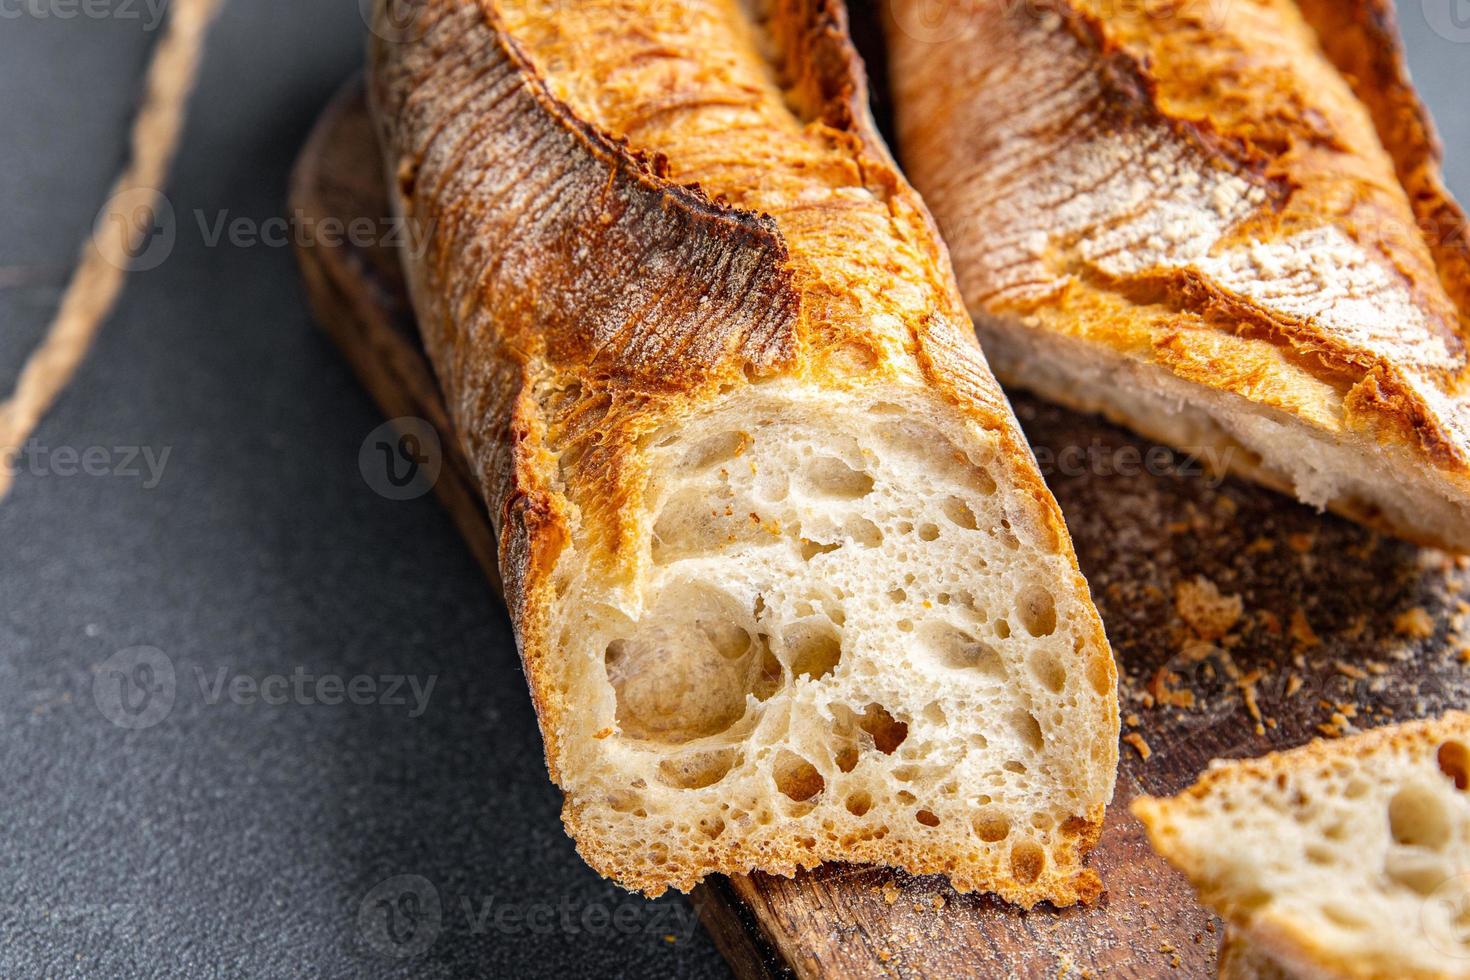 baguette fresh bread whole wheat flour sourdough meal food snack on the table copy space food background rustic photo